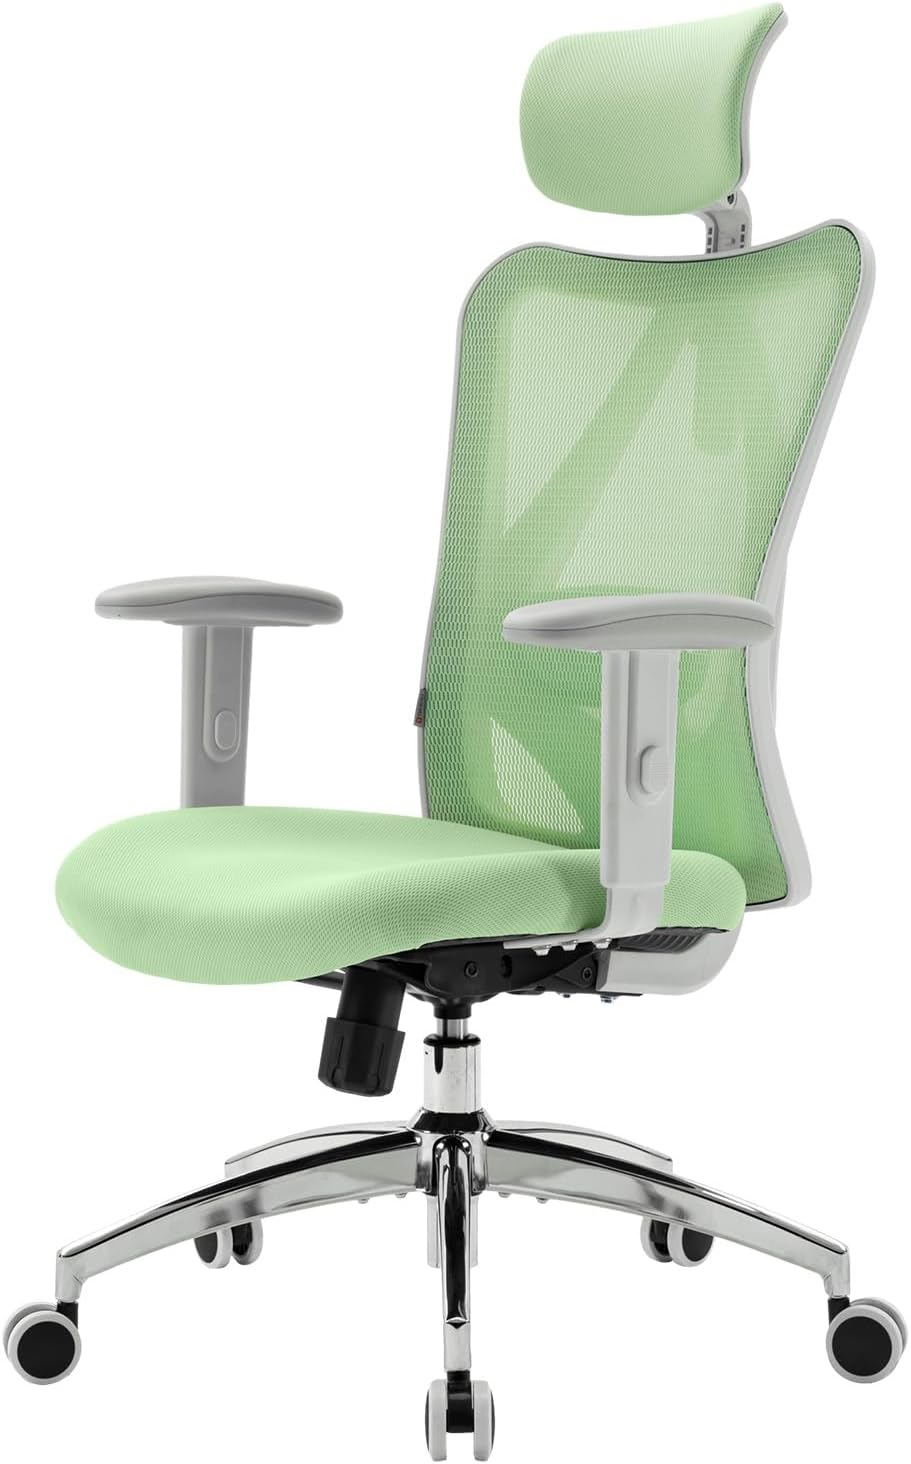 SIHOO M18 Ergonomic Office Chair, Computer Desk Chair with Adjustable Headrest and Lumbar Support, High Back Executive Swivel Chair for Home Office (Light Green)